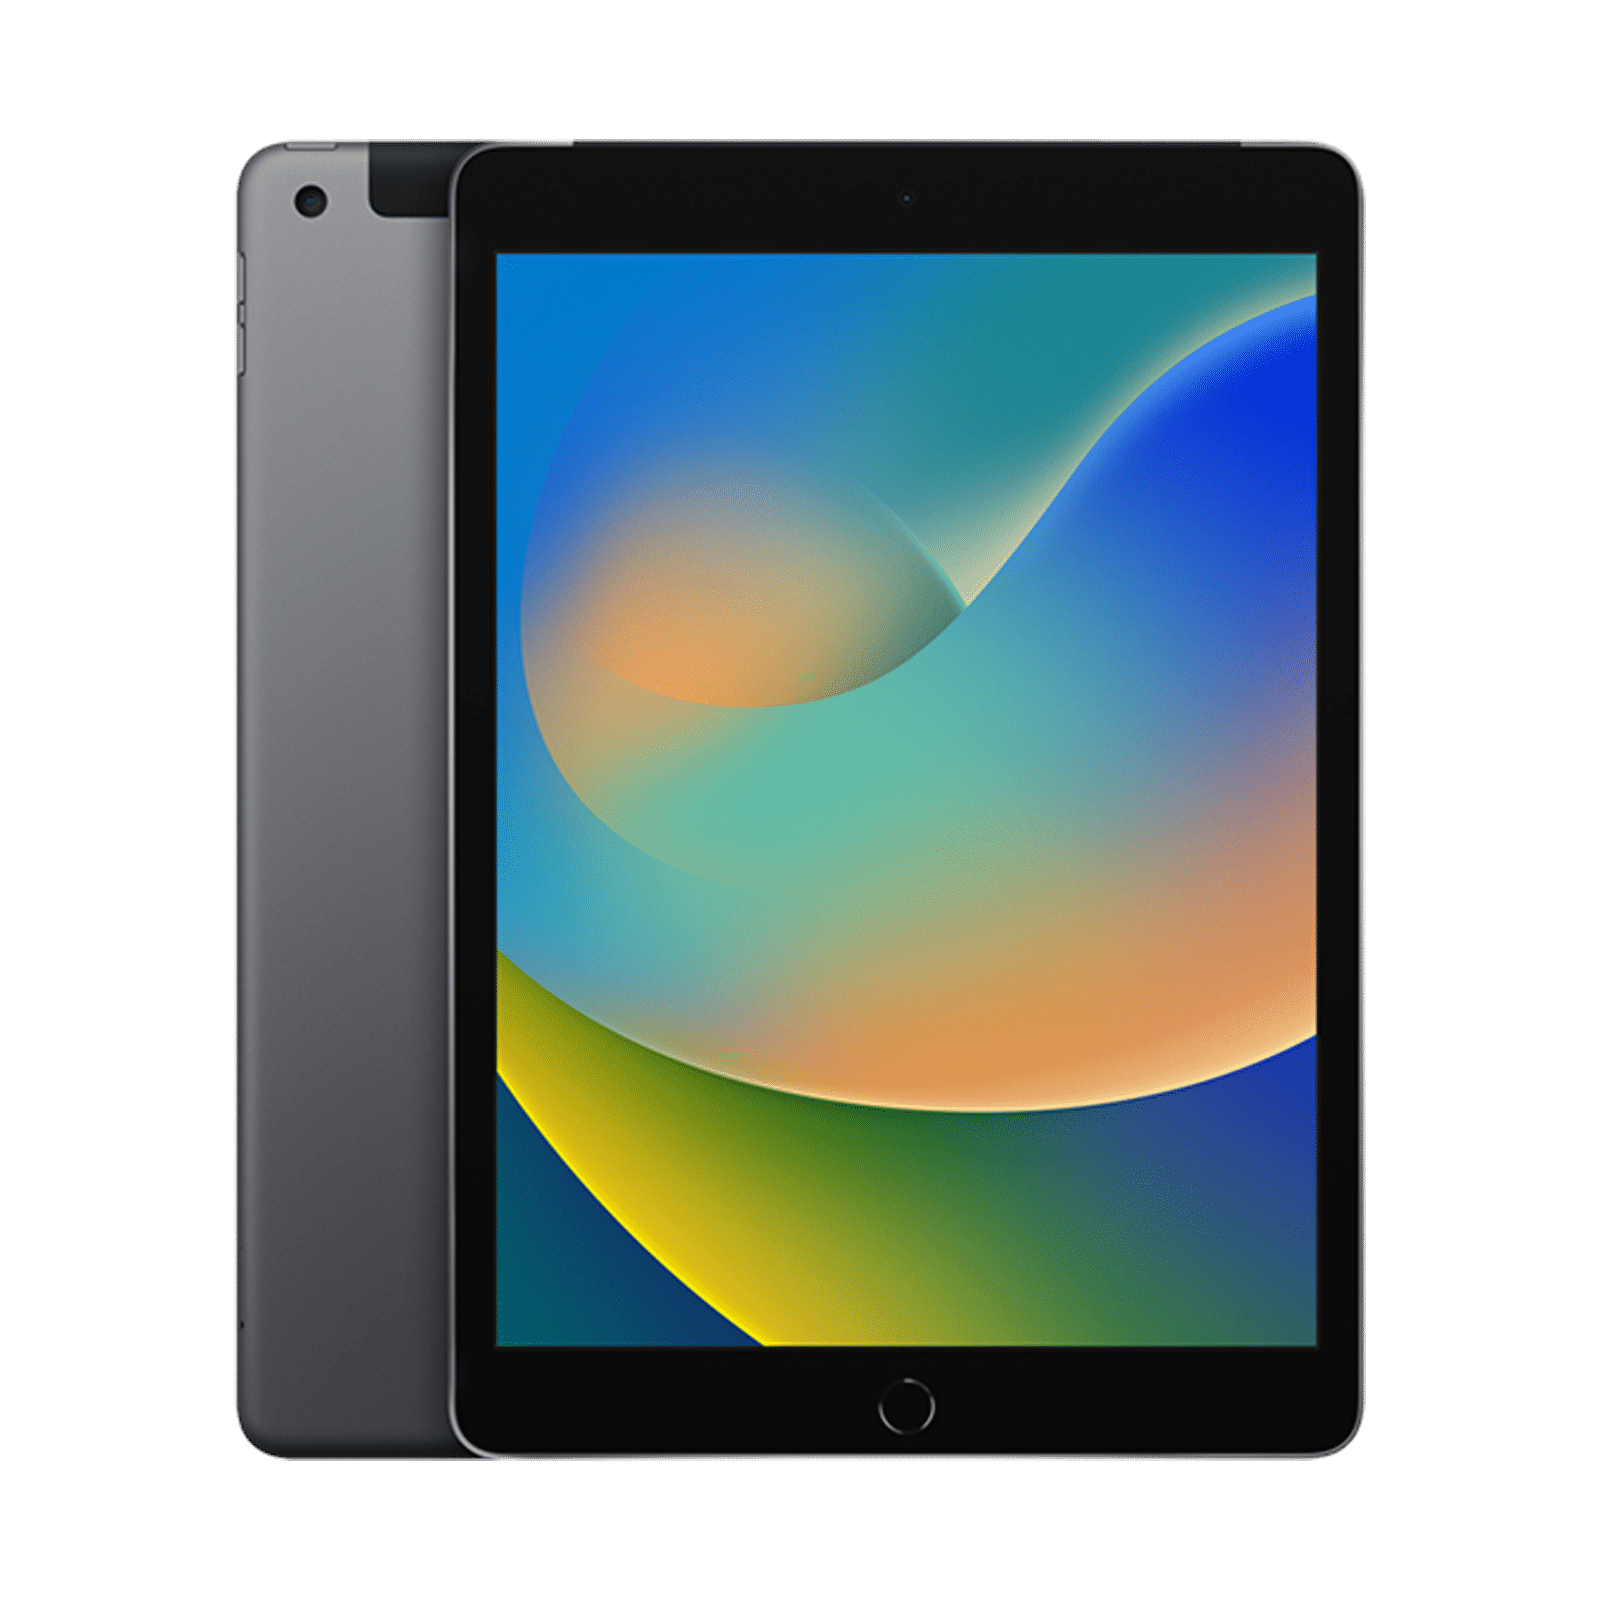 Protect and enhance your iPad 10.2 9th Gen (2021)